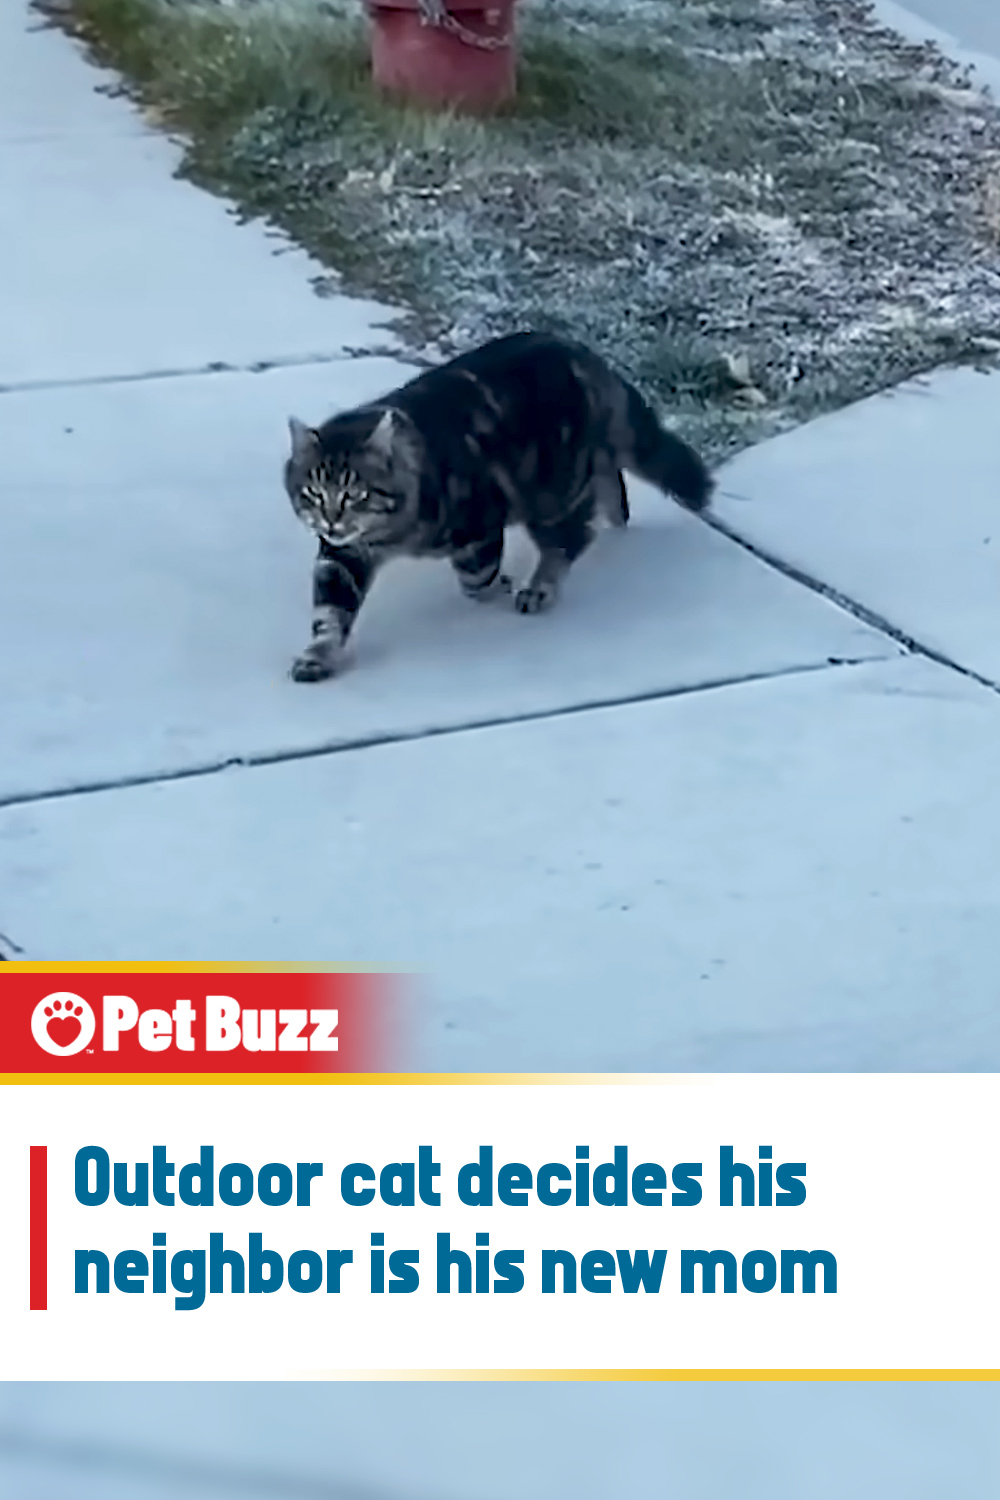 Outdoor cat decides his neighbor is his new mom